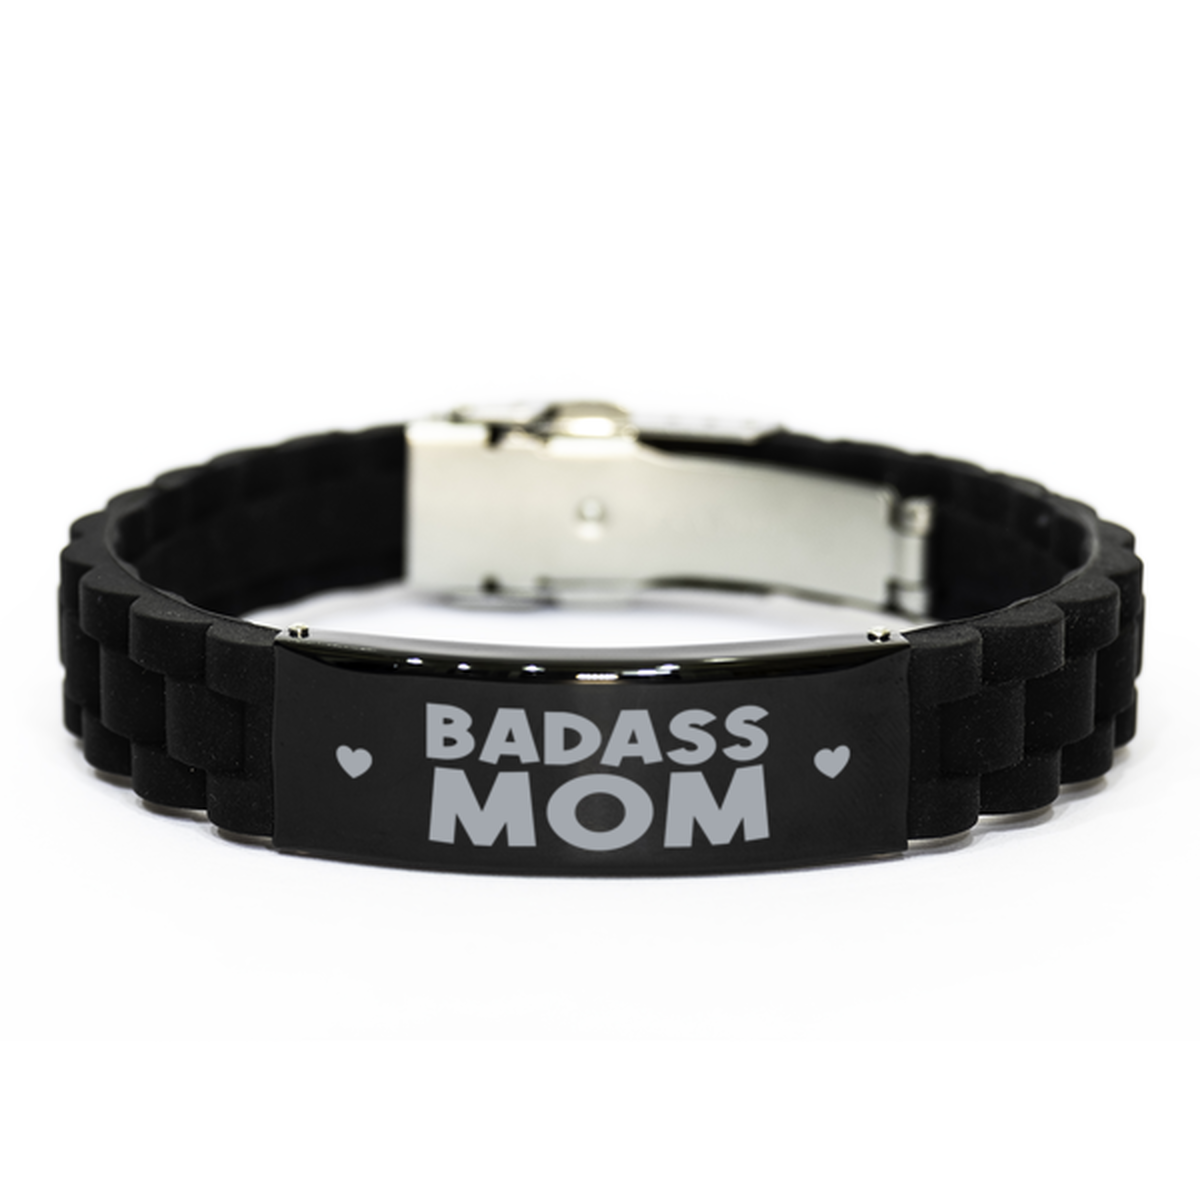 Mom Black Bracelet, Badass Mom, Funny Family Gifts For Mom From Son Daughter